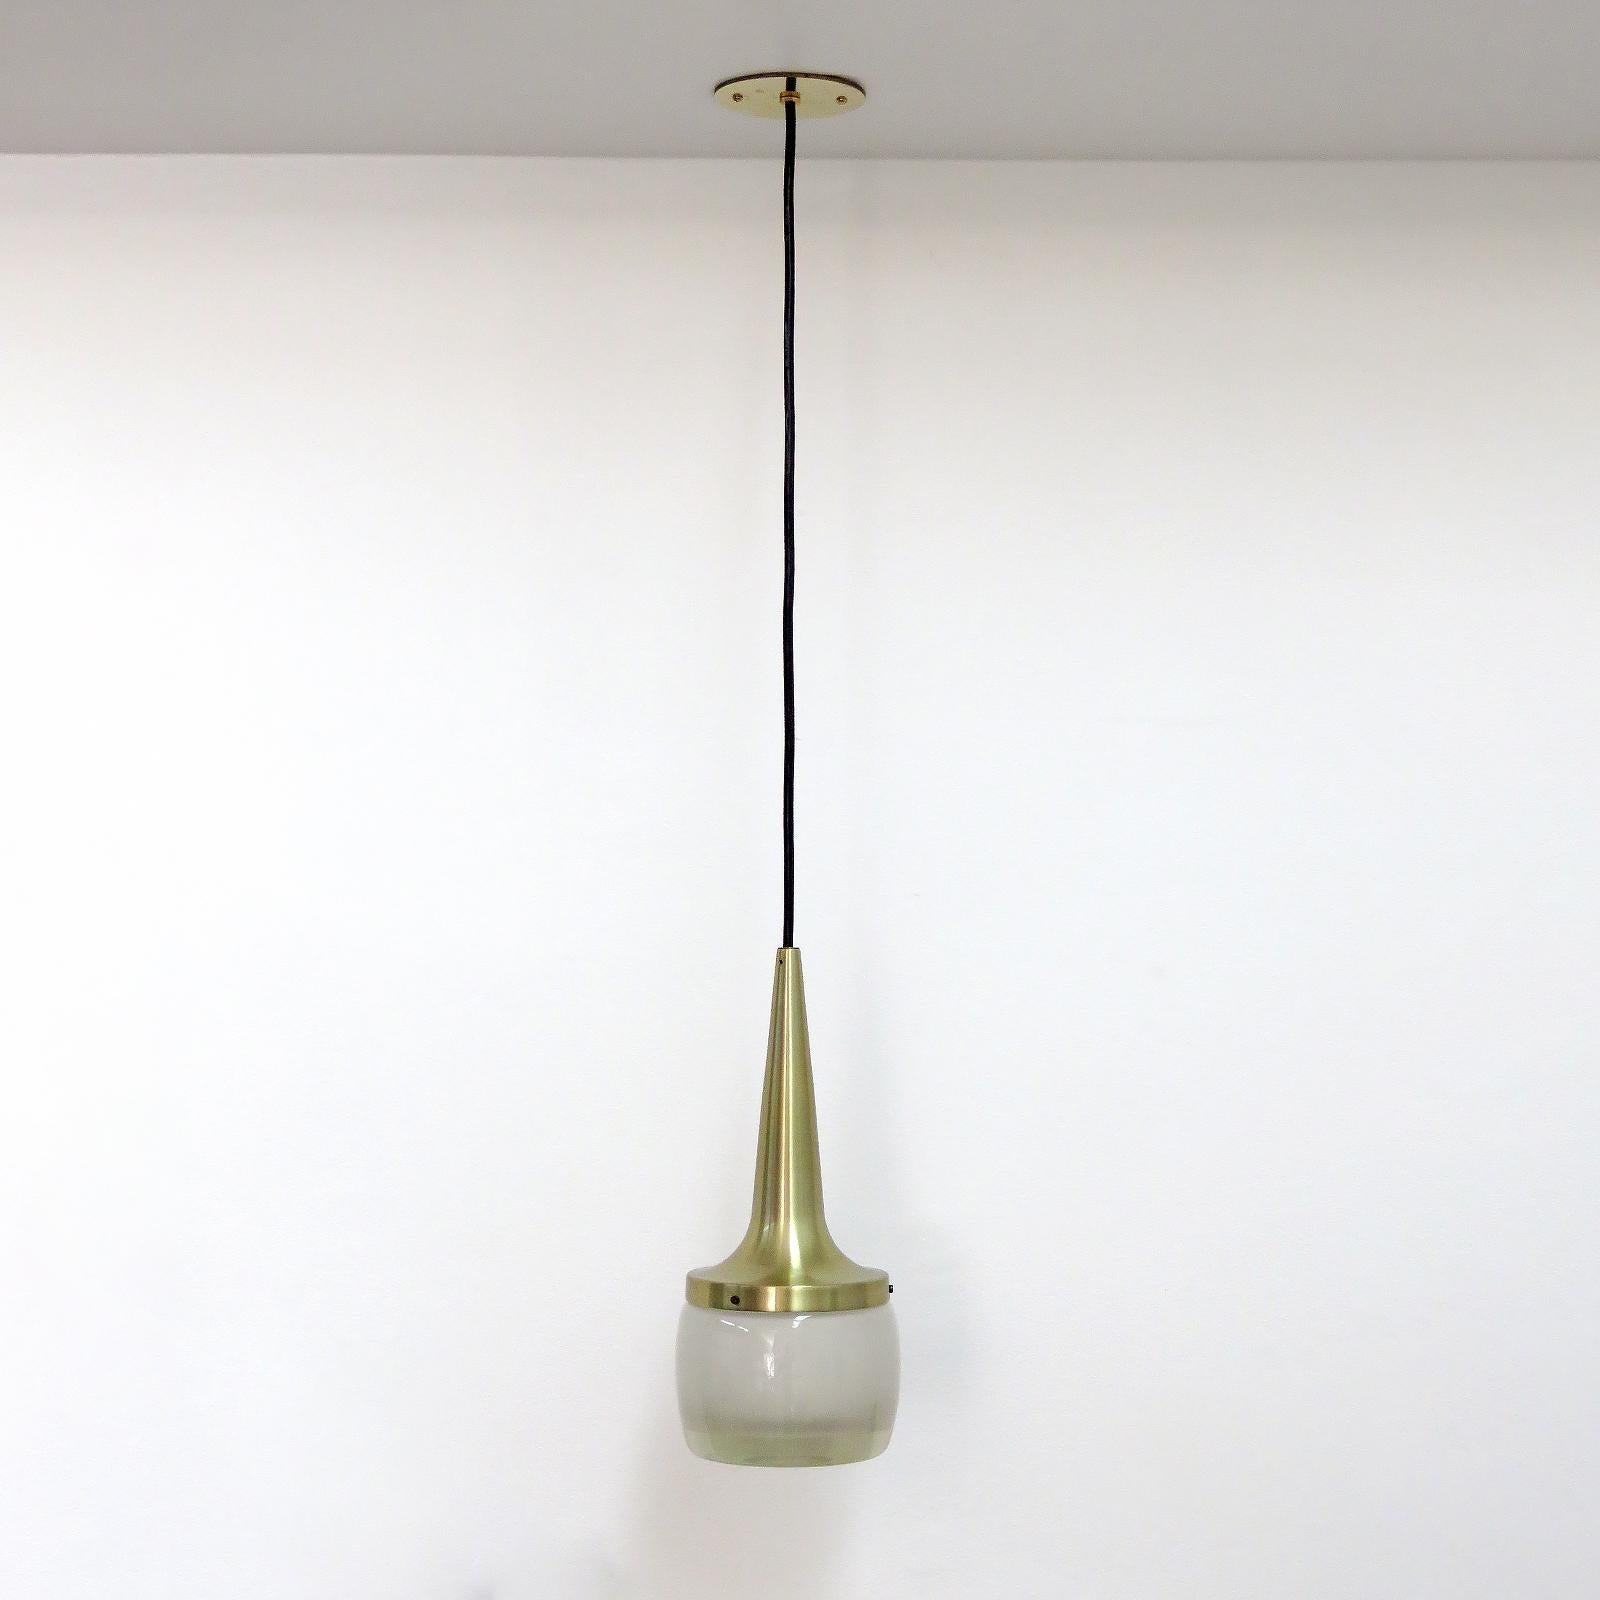 Stunning pendant lights by Staff Leuchten, Germany, brushed brass colored aluminum and heavy molded glass, etched on the inside, with custom solid brass canopy for individual pendants (Shown as a set of 3). Wired for US standards, one E26 socket per